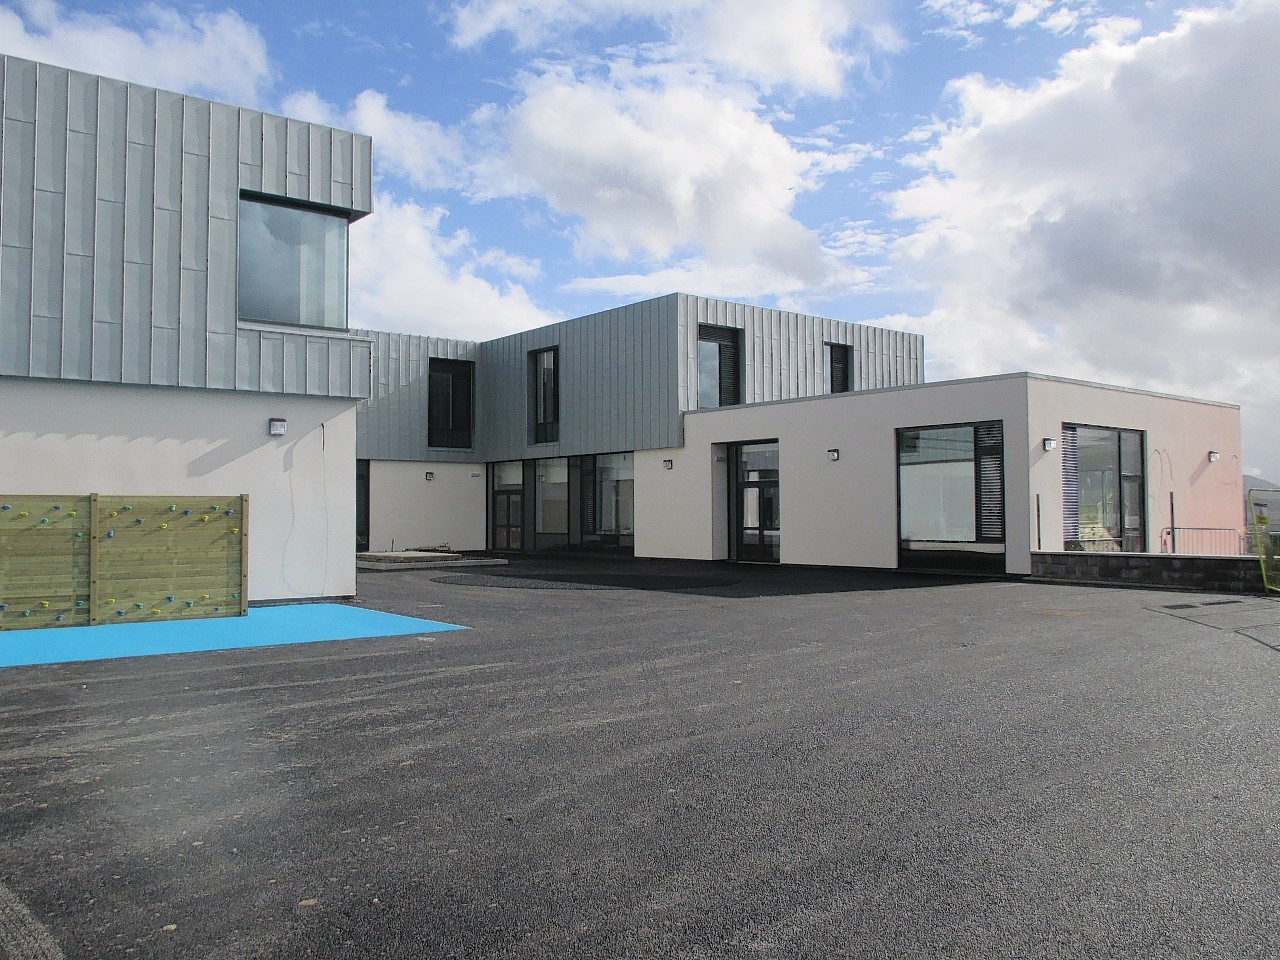 Part of the new joint campus in Caol